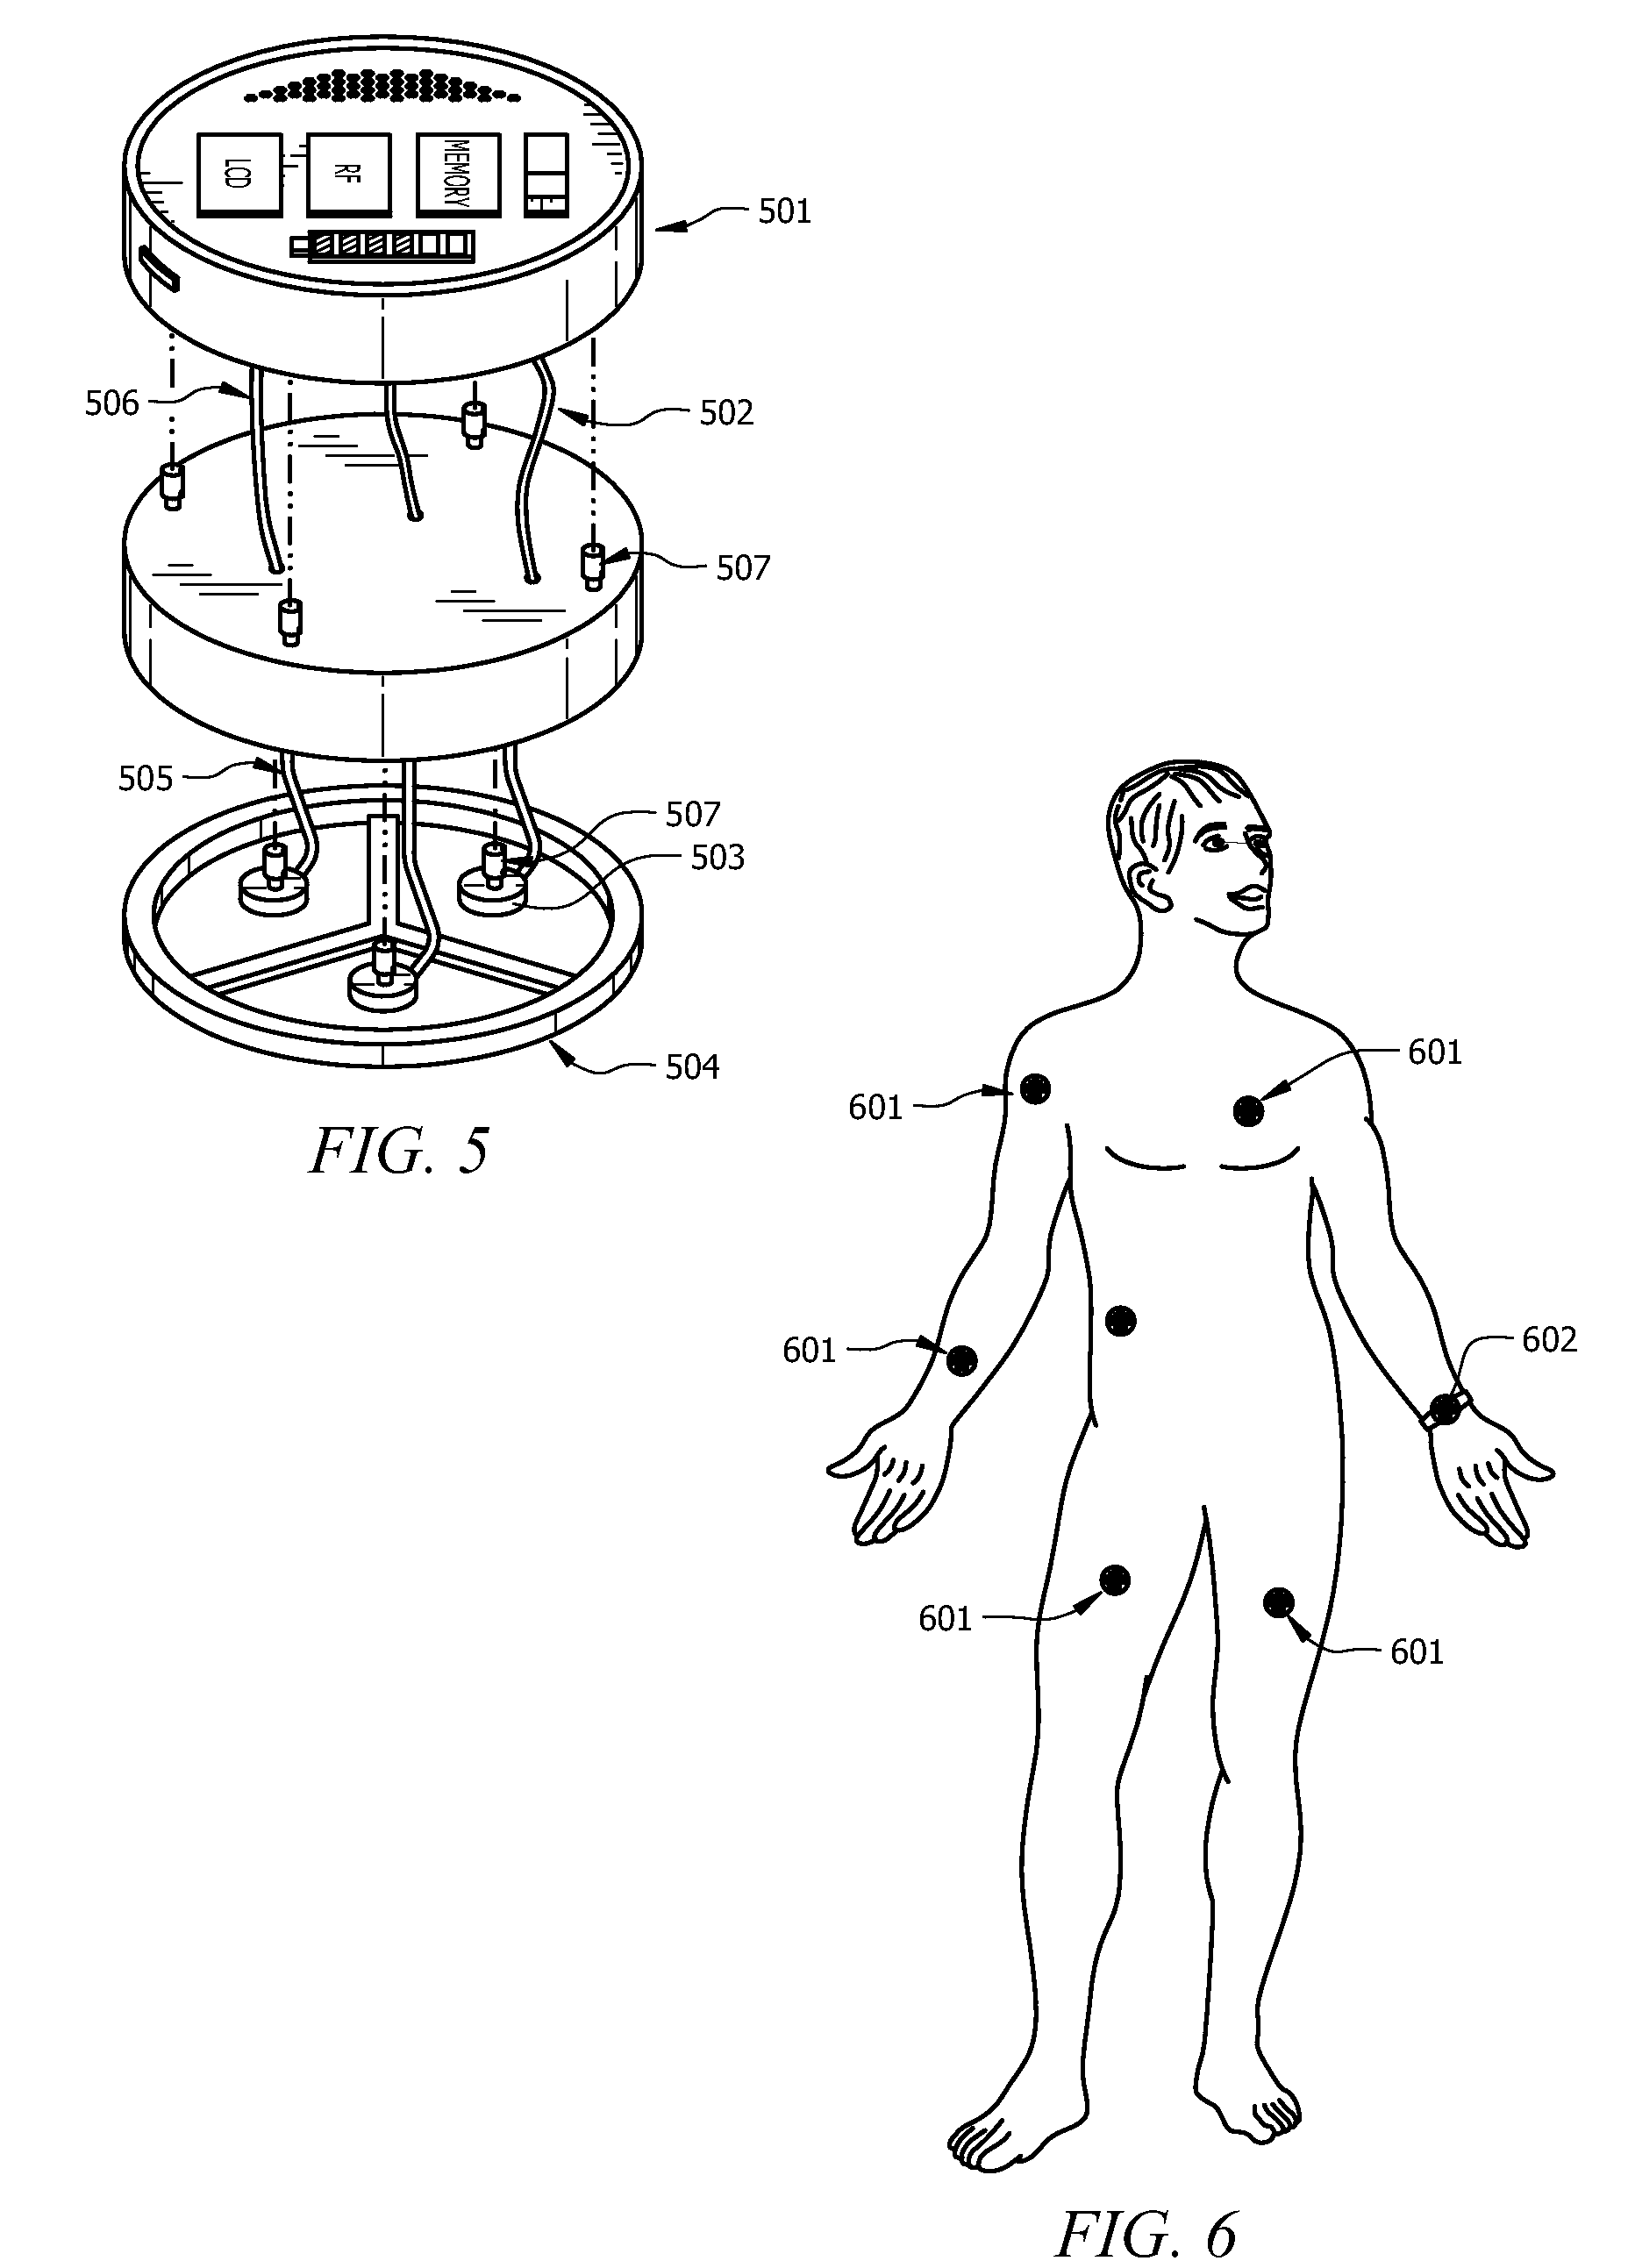 Diagnostic device for remote sensing and transmitting biophysiological signals